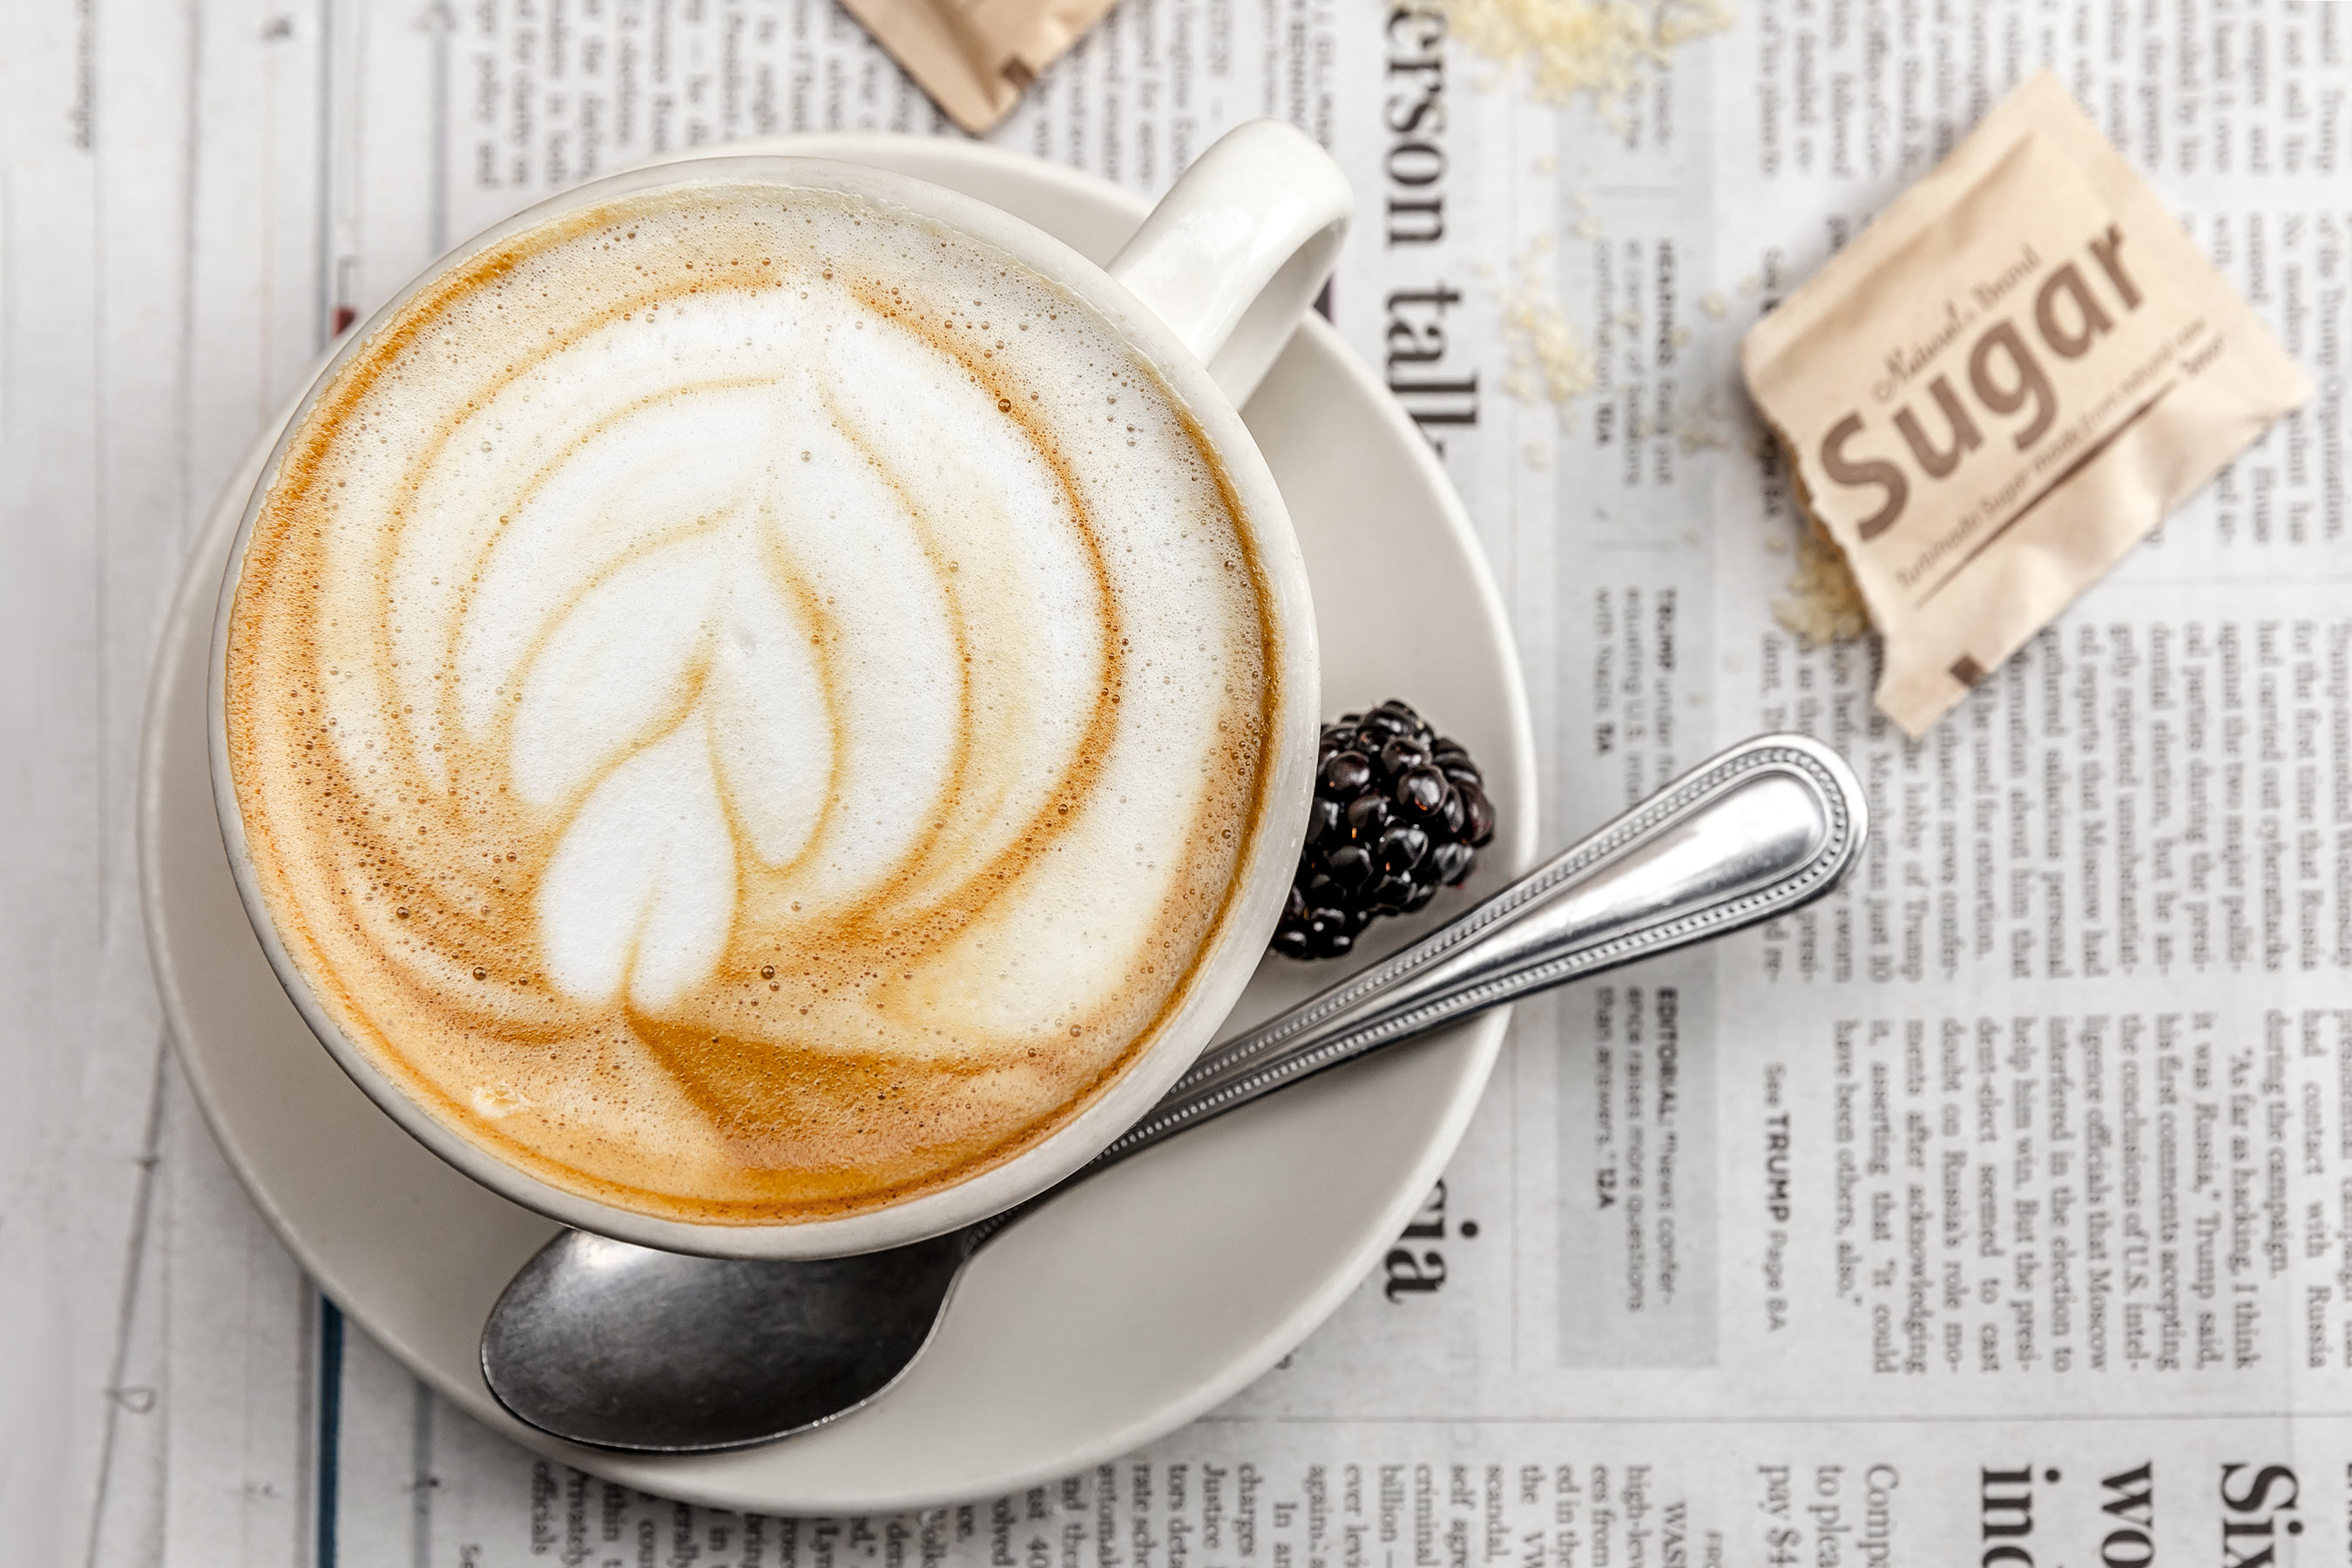 Glanger Photography | Coffee with swirl design in the foam.  On a newspaper with sugar packet nearby